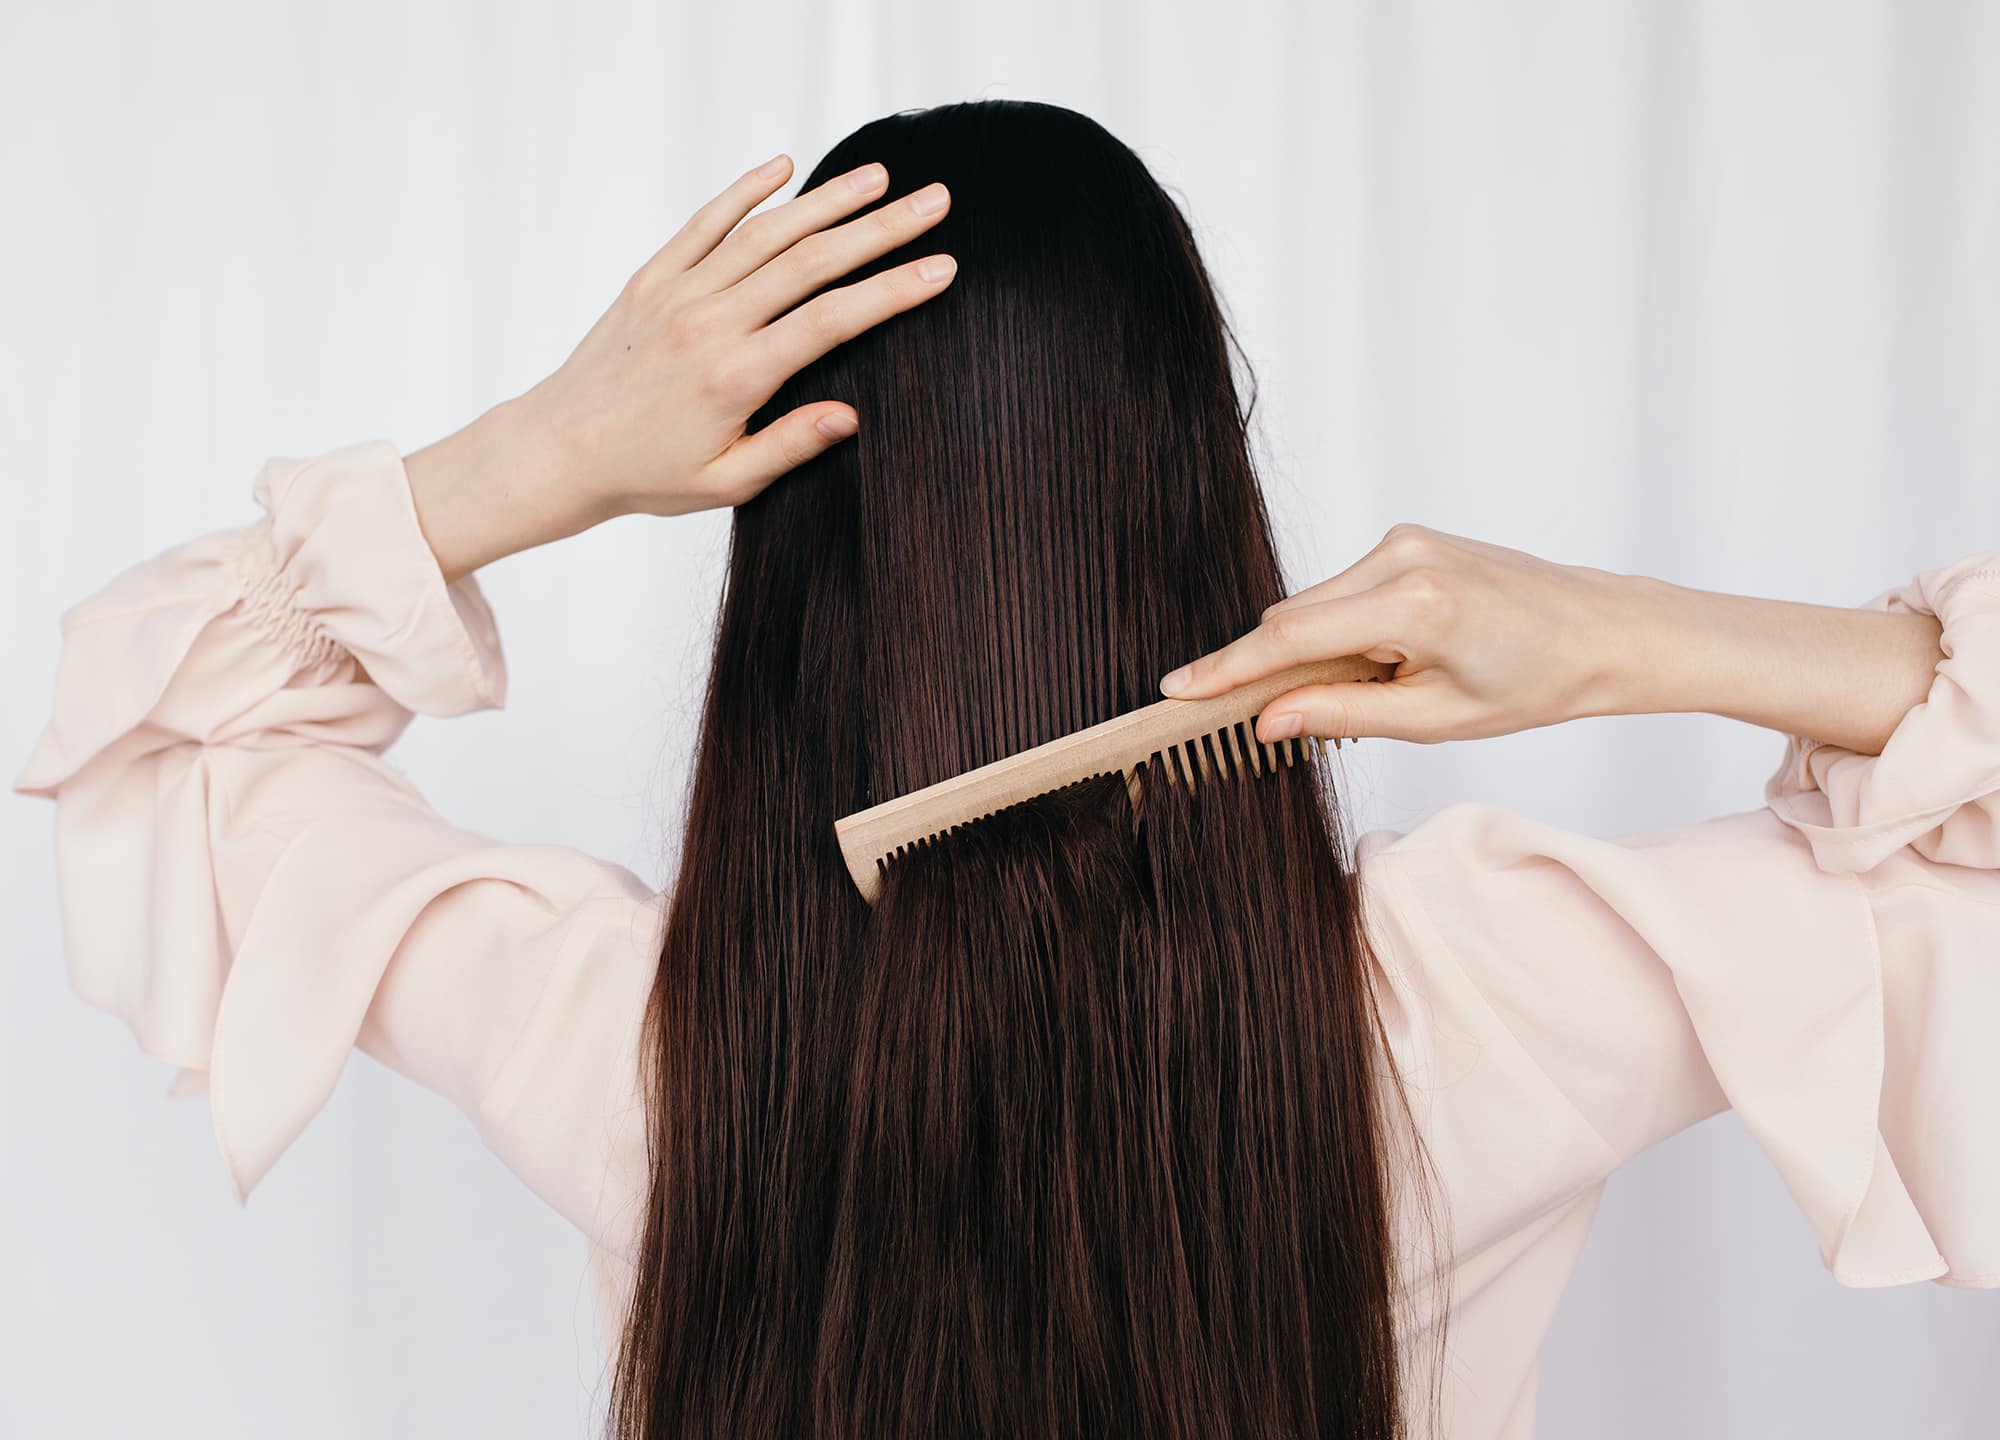 My search for something that could actually produce more luscious locks lasted quite a few years. Here's why we lose hair, and how to treat thinning hair.